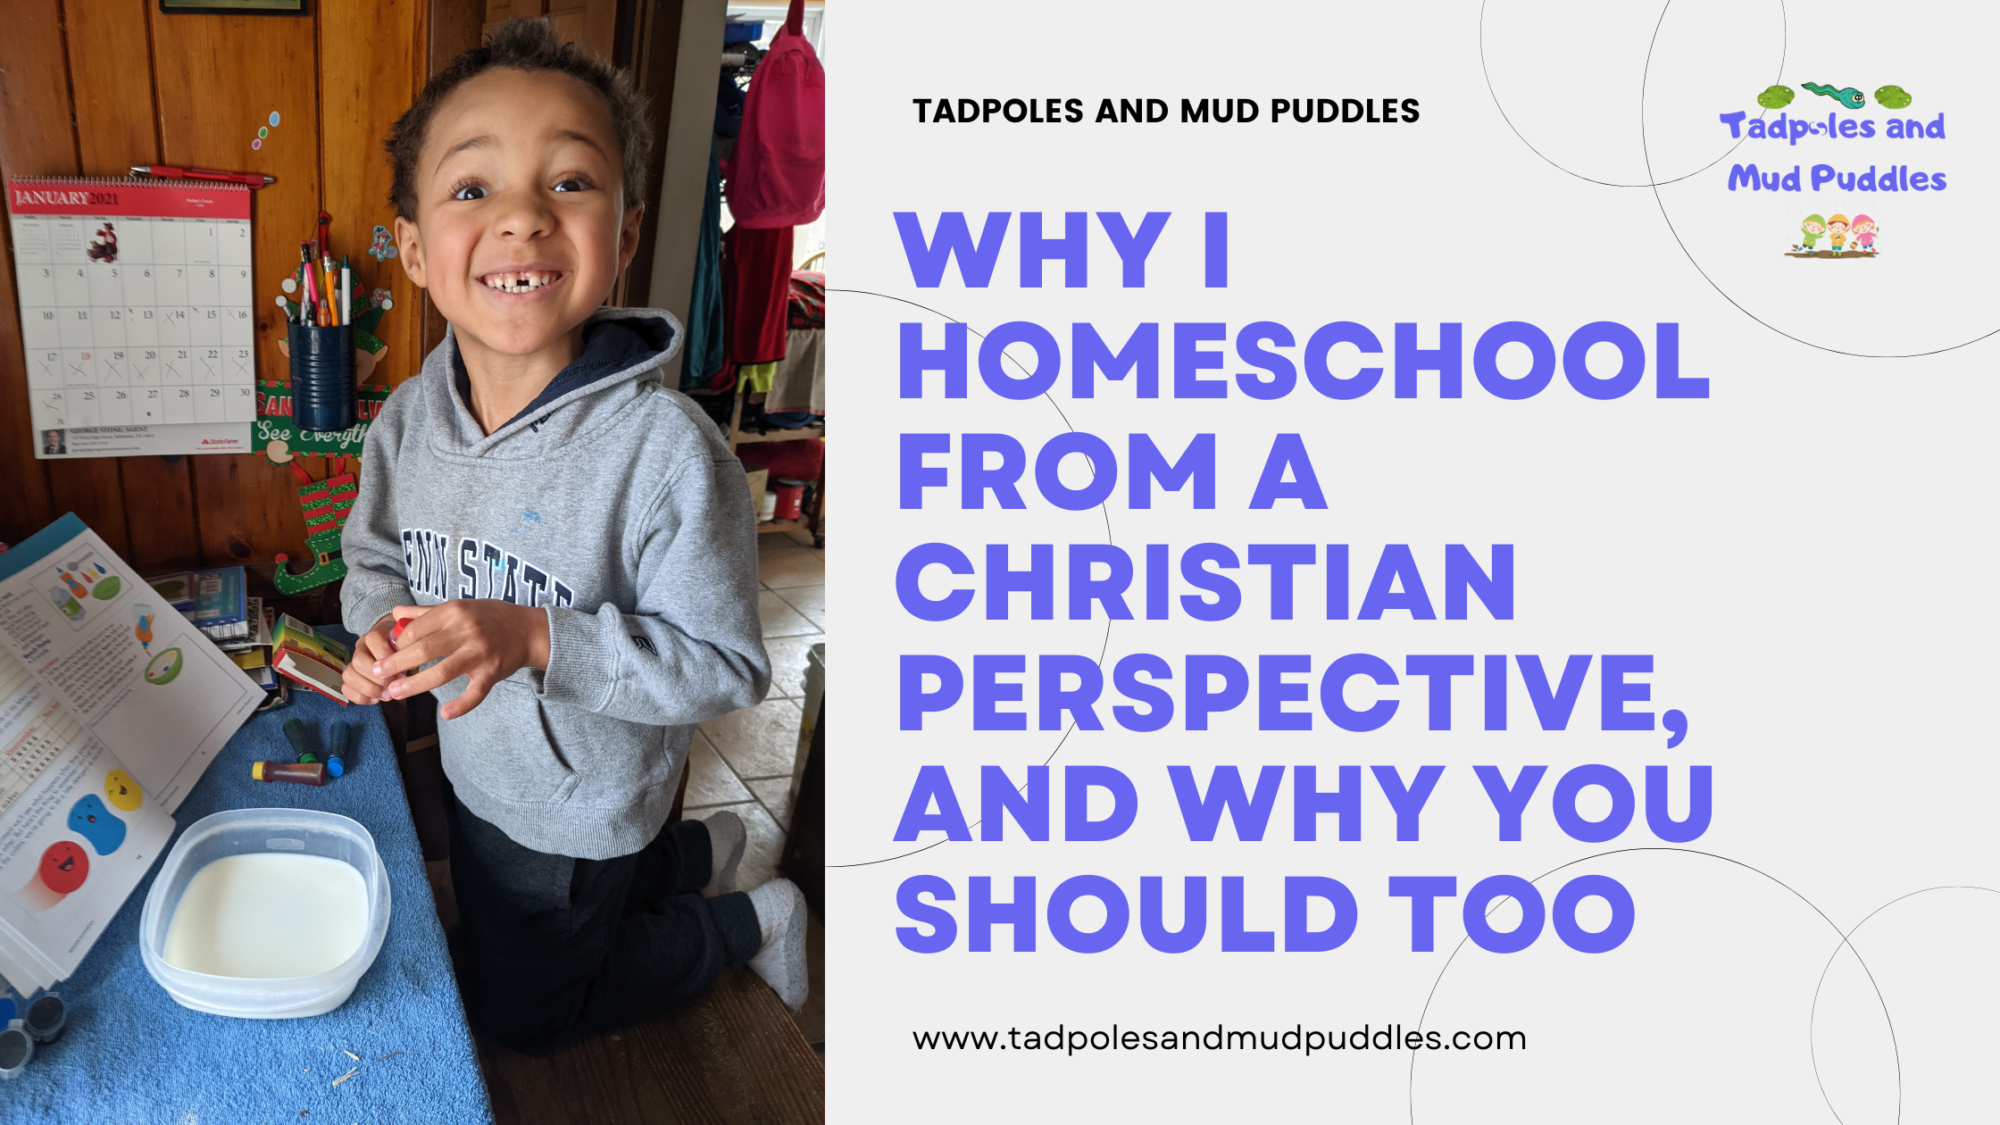 Why I homeschool from a Christian Perspective and why you should too